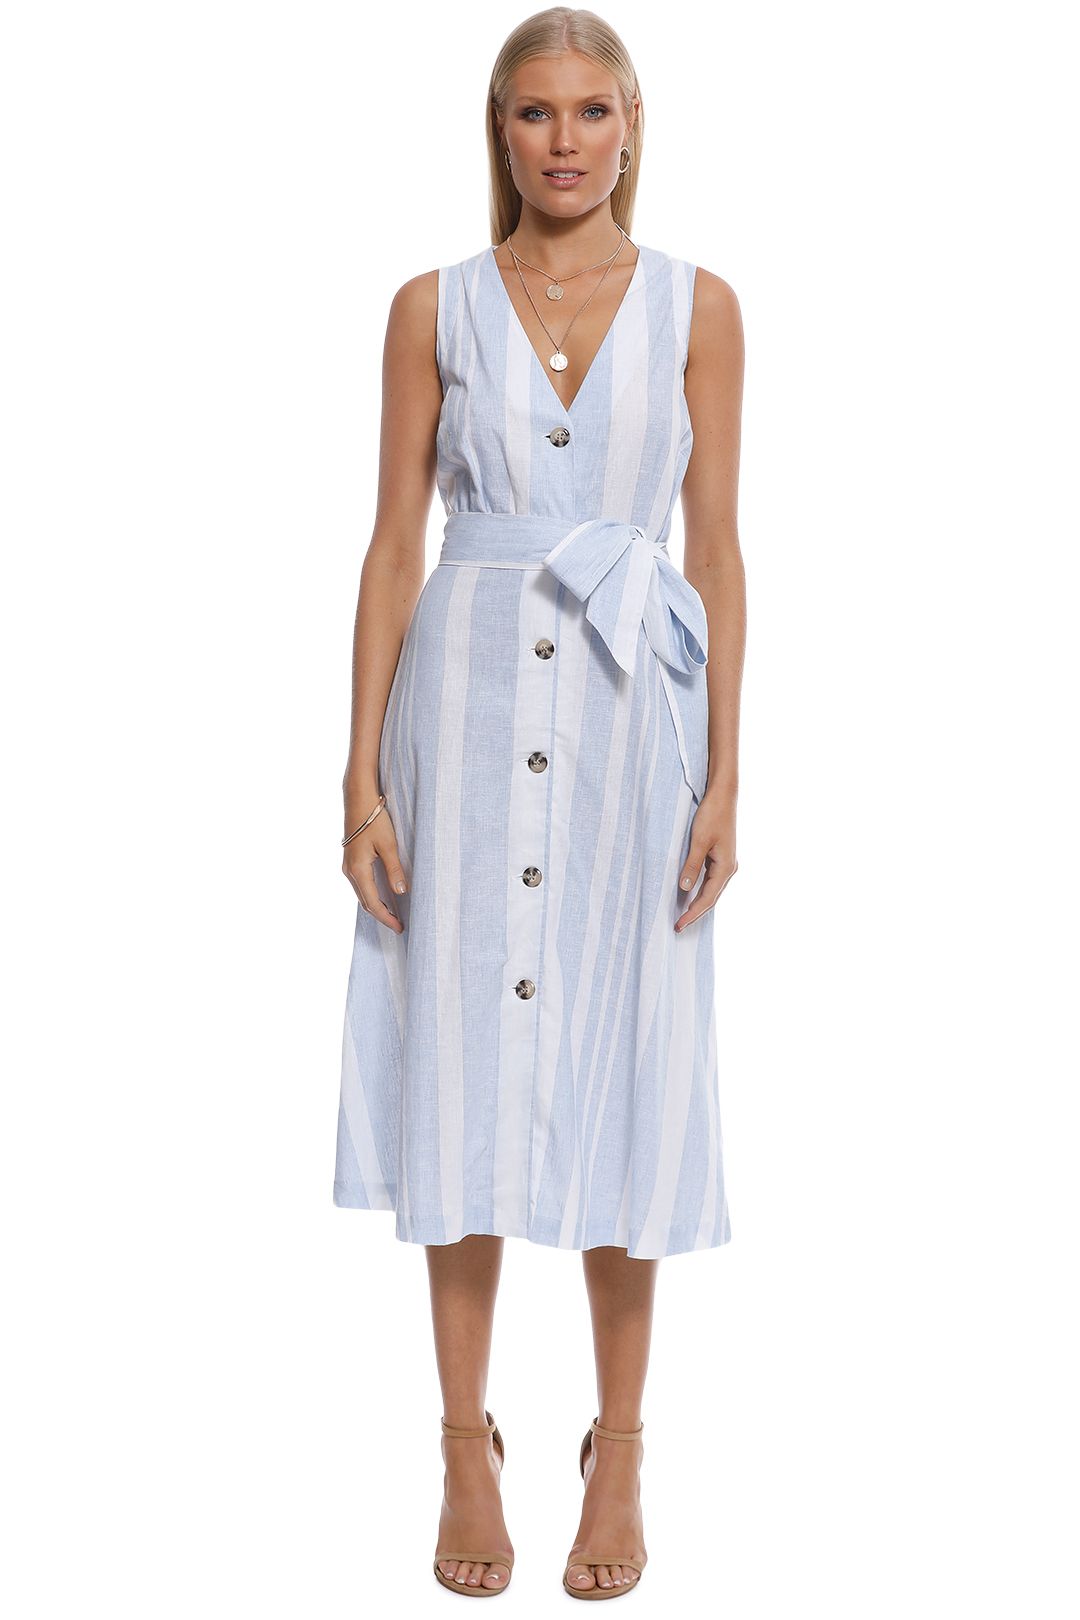 Stripe Button Midi Dress - Blue by Witchery for Hire